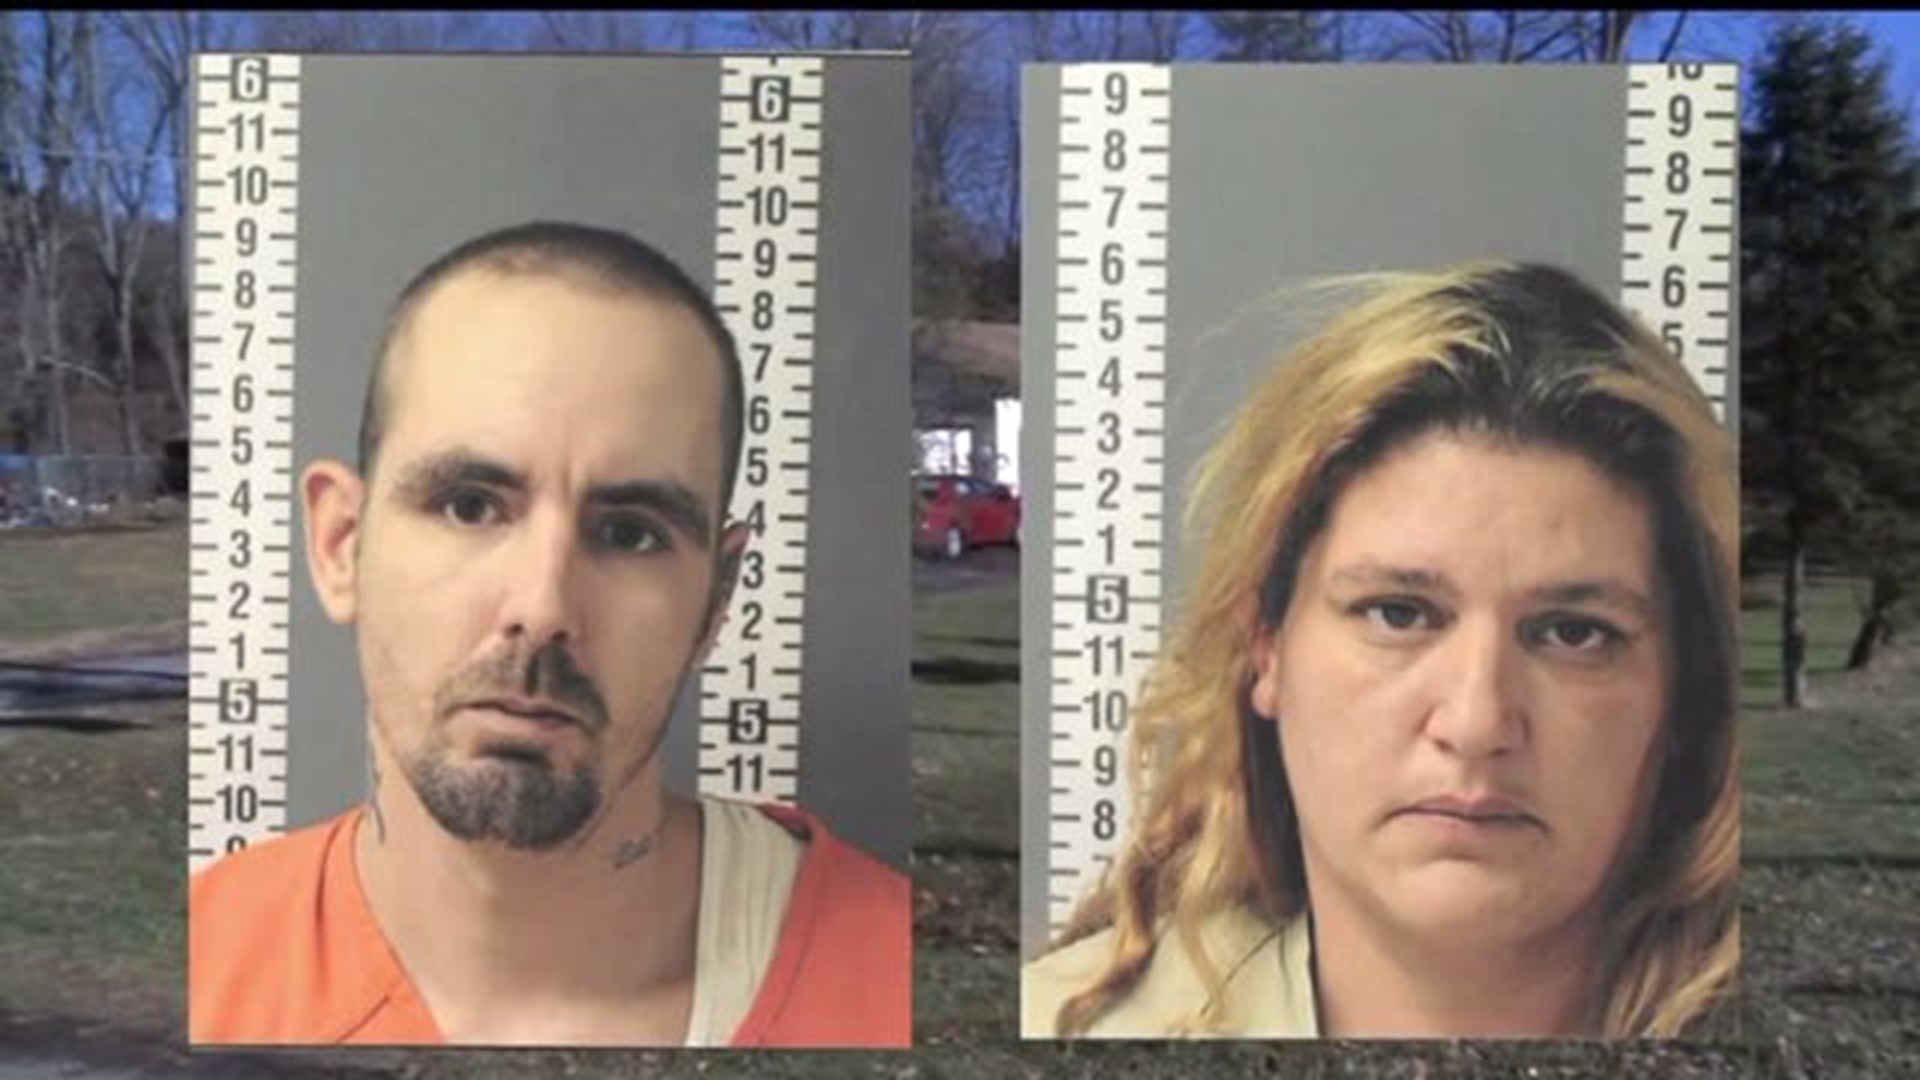 Halifax parents charged with child abuse: How did Dauphin Co. CYS respond?